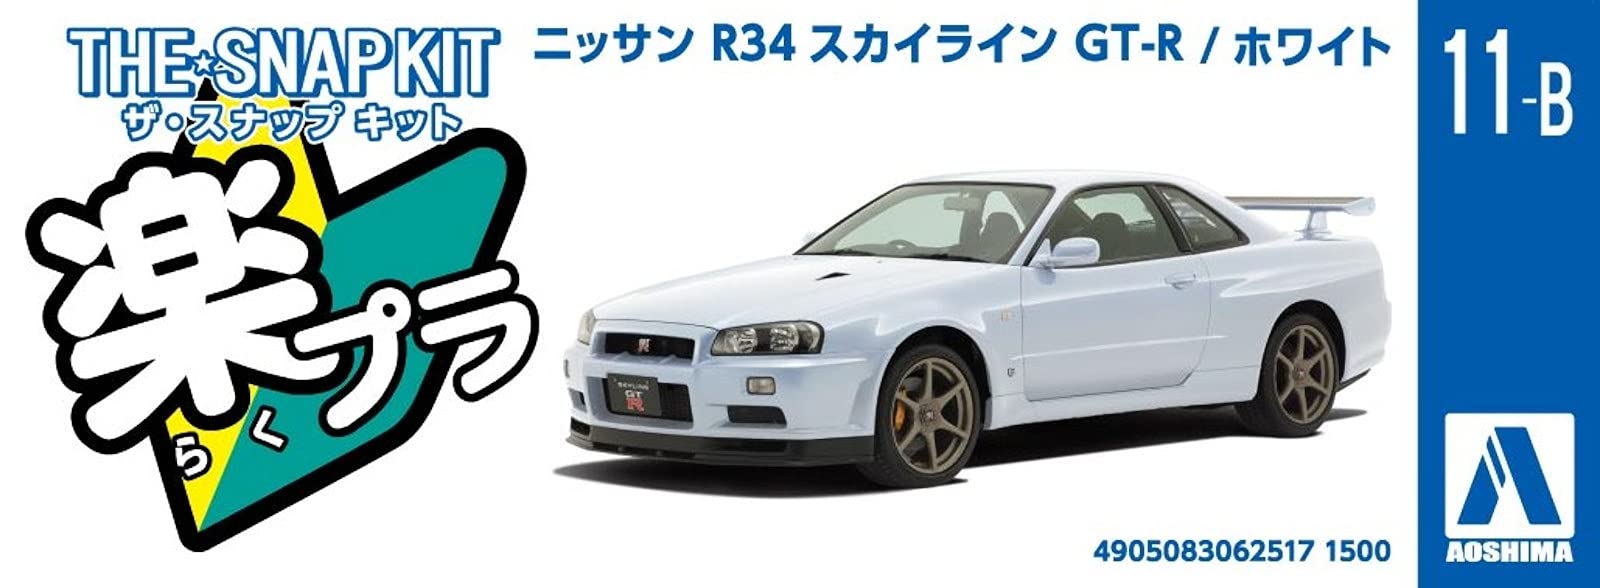 AOSHIMA 1/32 The Snap Kit Series Nissan R34 Skyline GT-R White Colored 11-B NEW_5